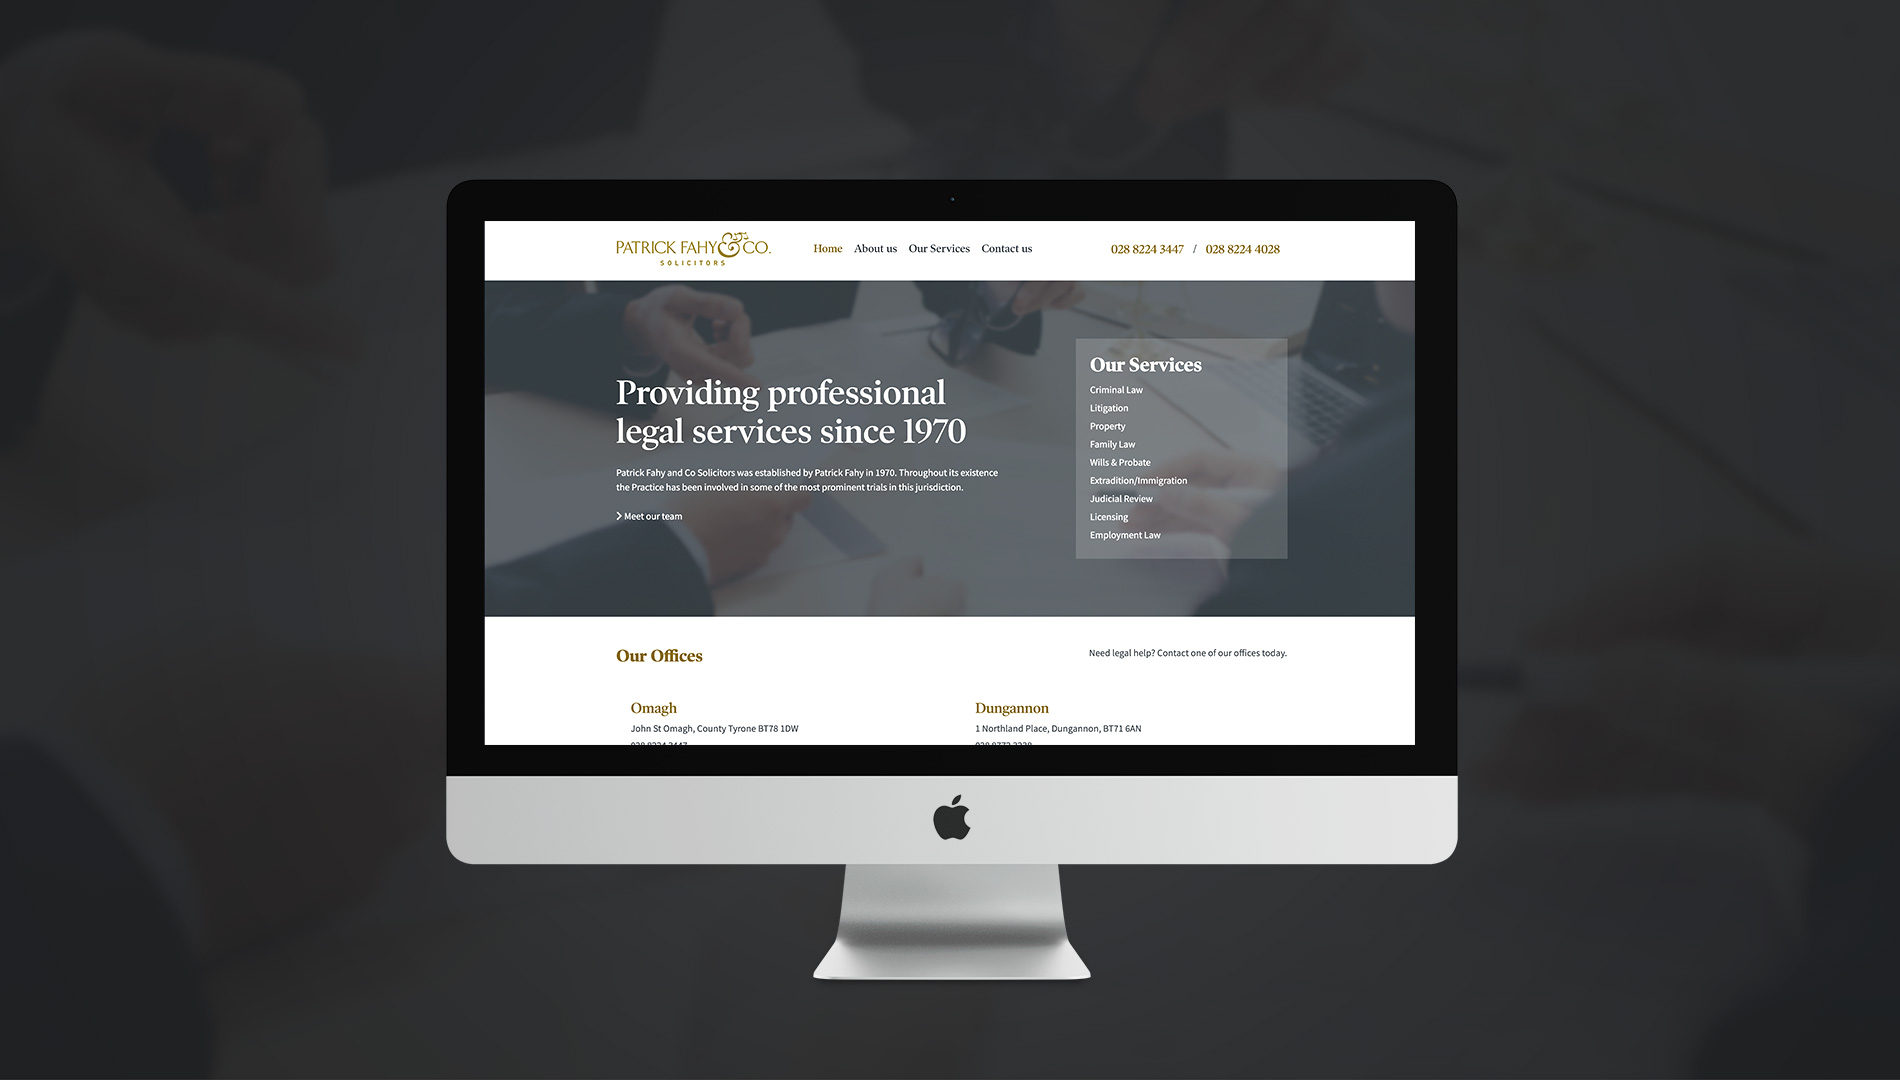 P. Fahy & Co Solicitors Website